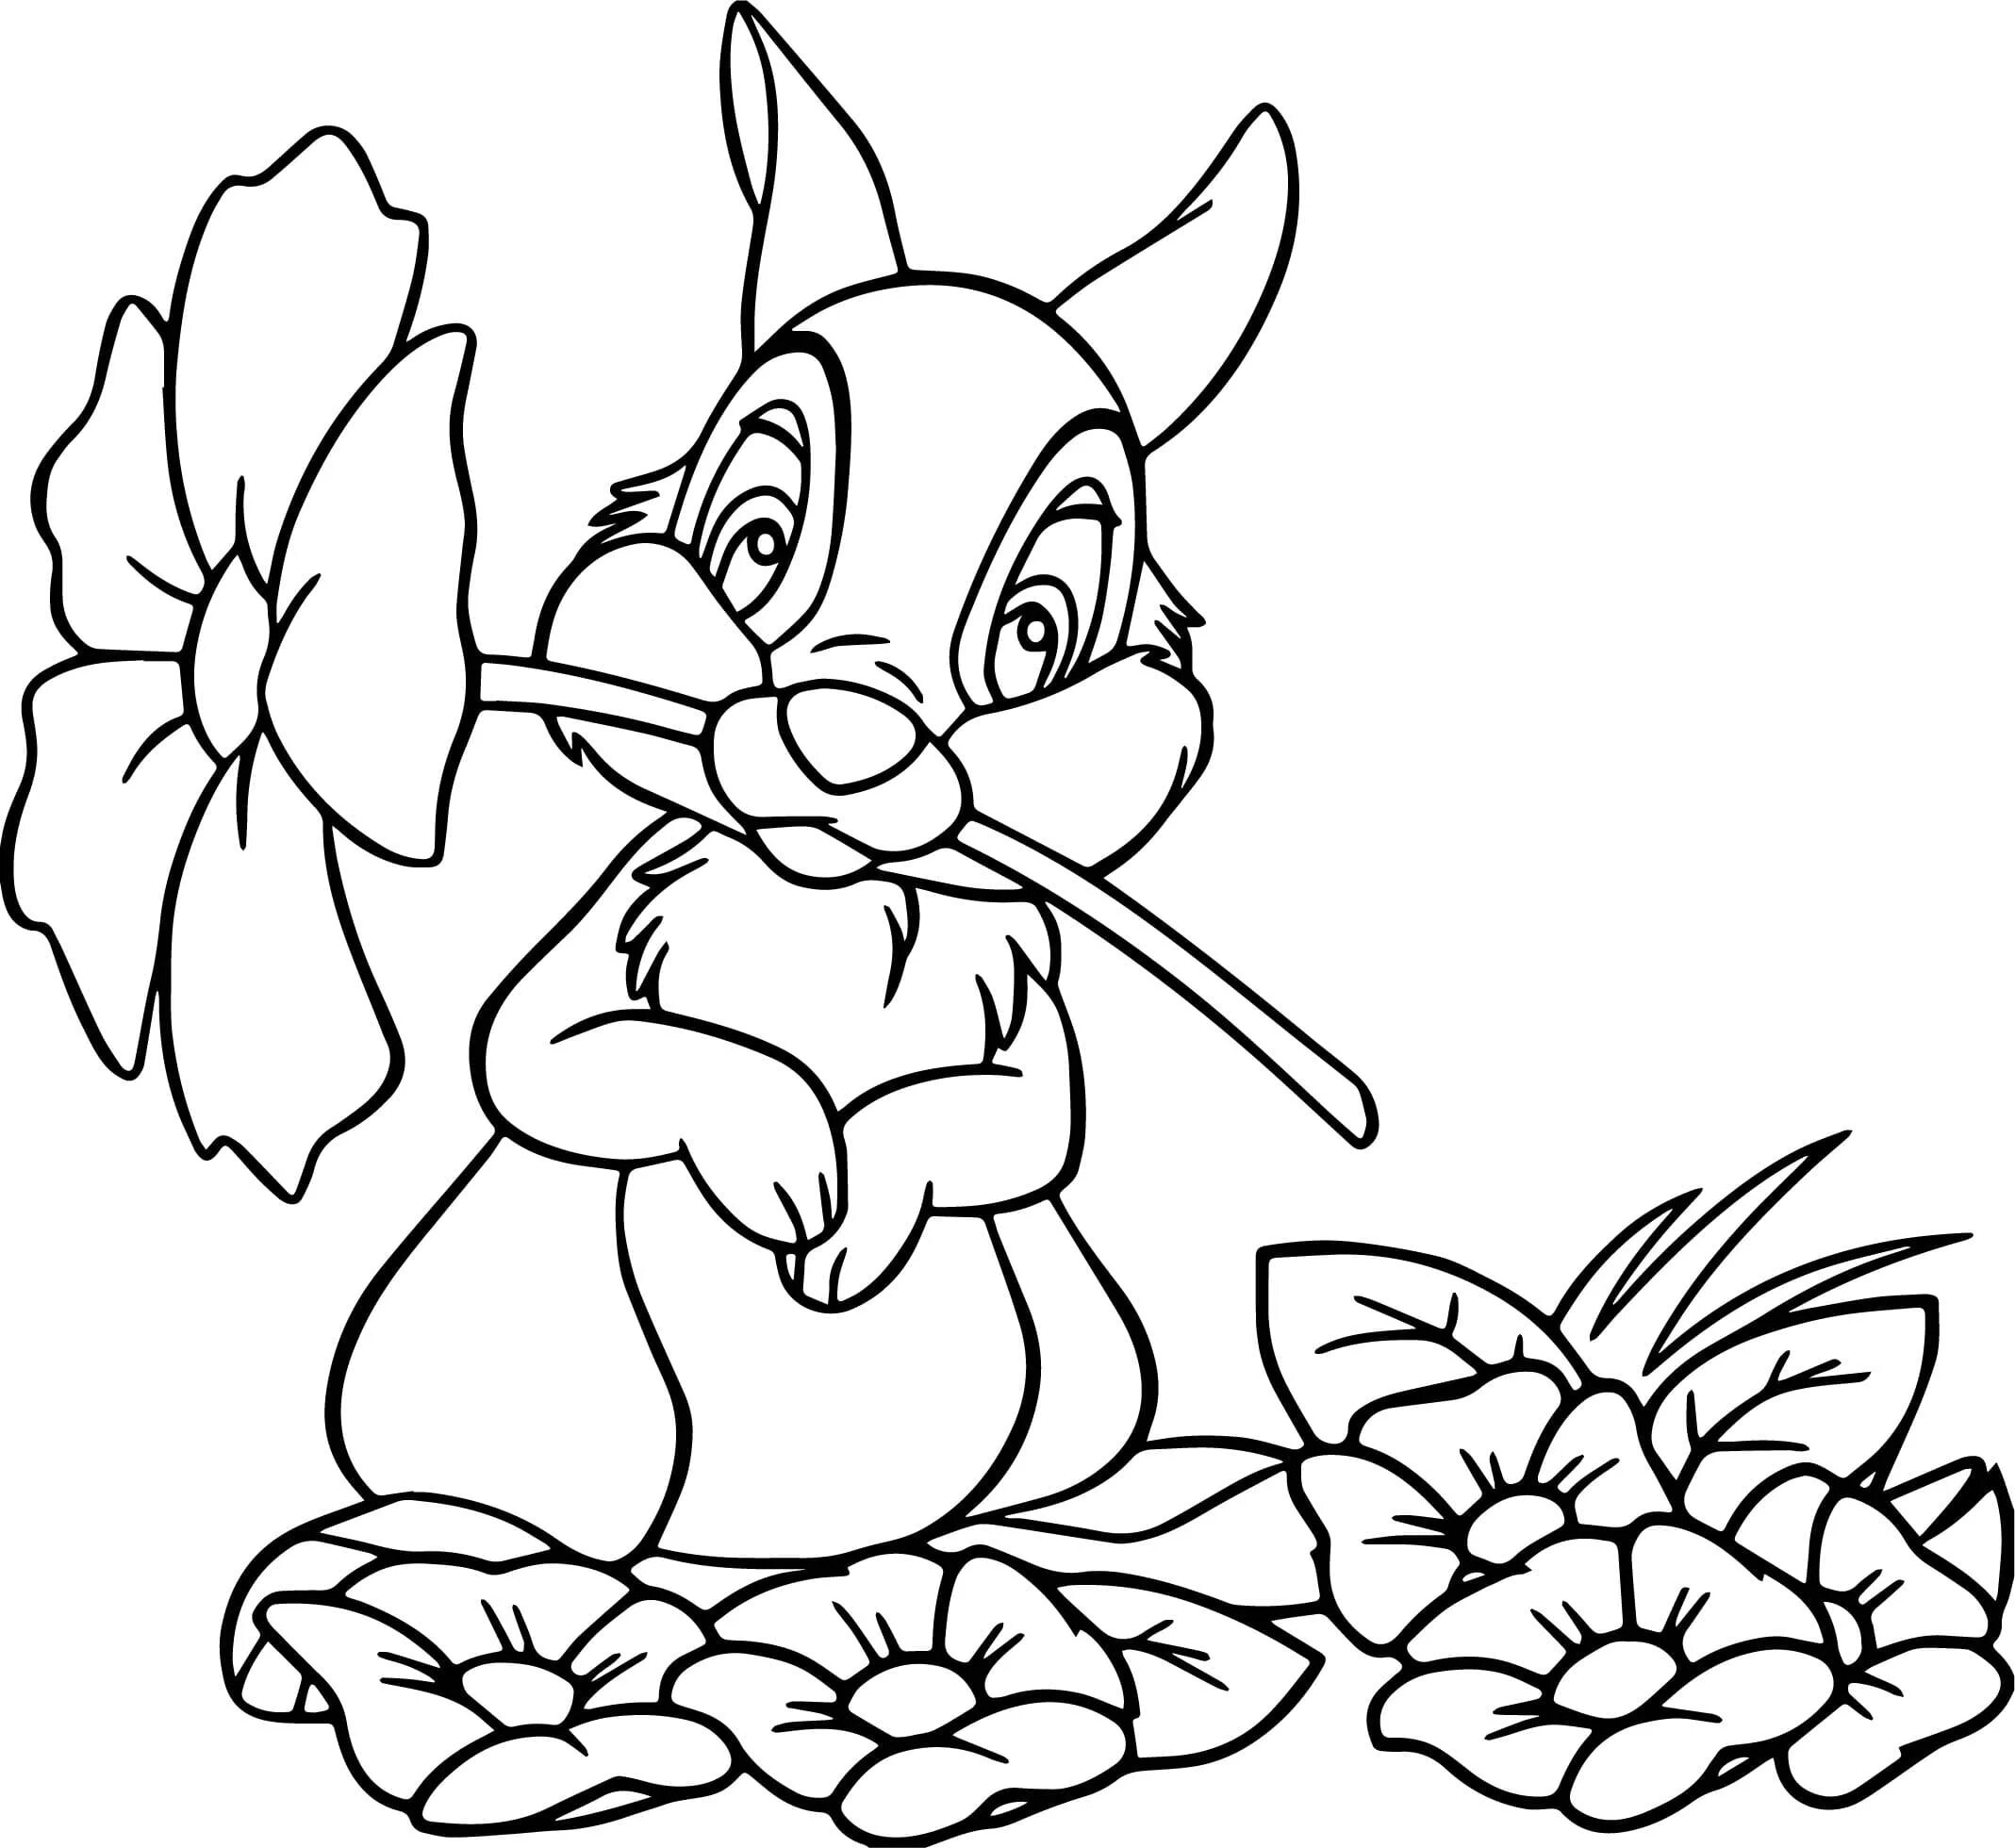 Bambi Bunny magnetic coloring book